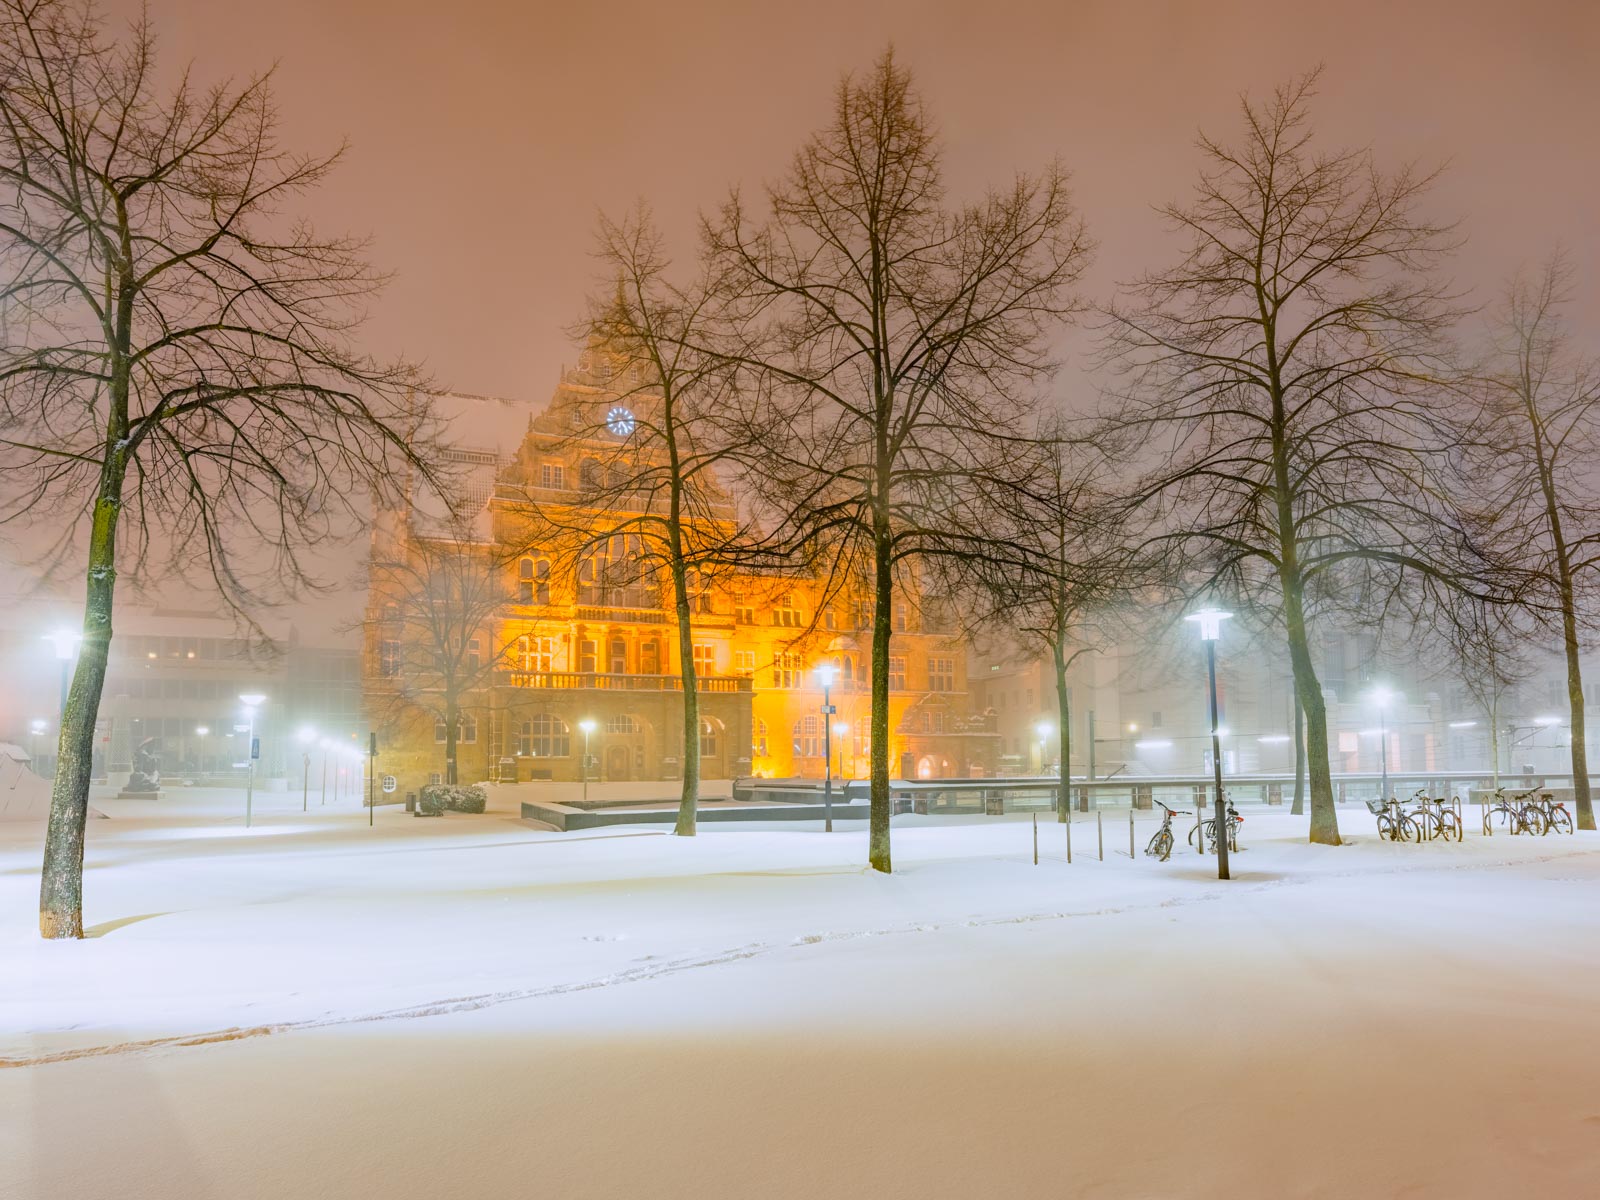 City Hall in the snow on 7 February 2021 (Bielefeld, Germany).